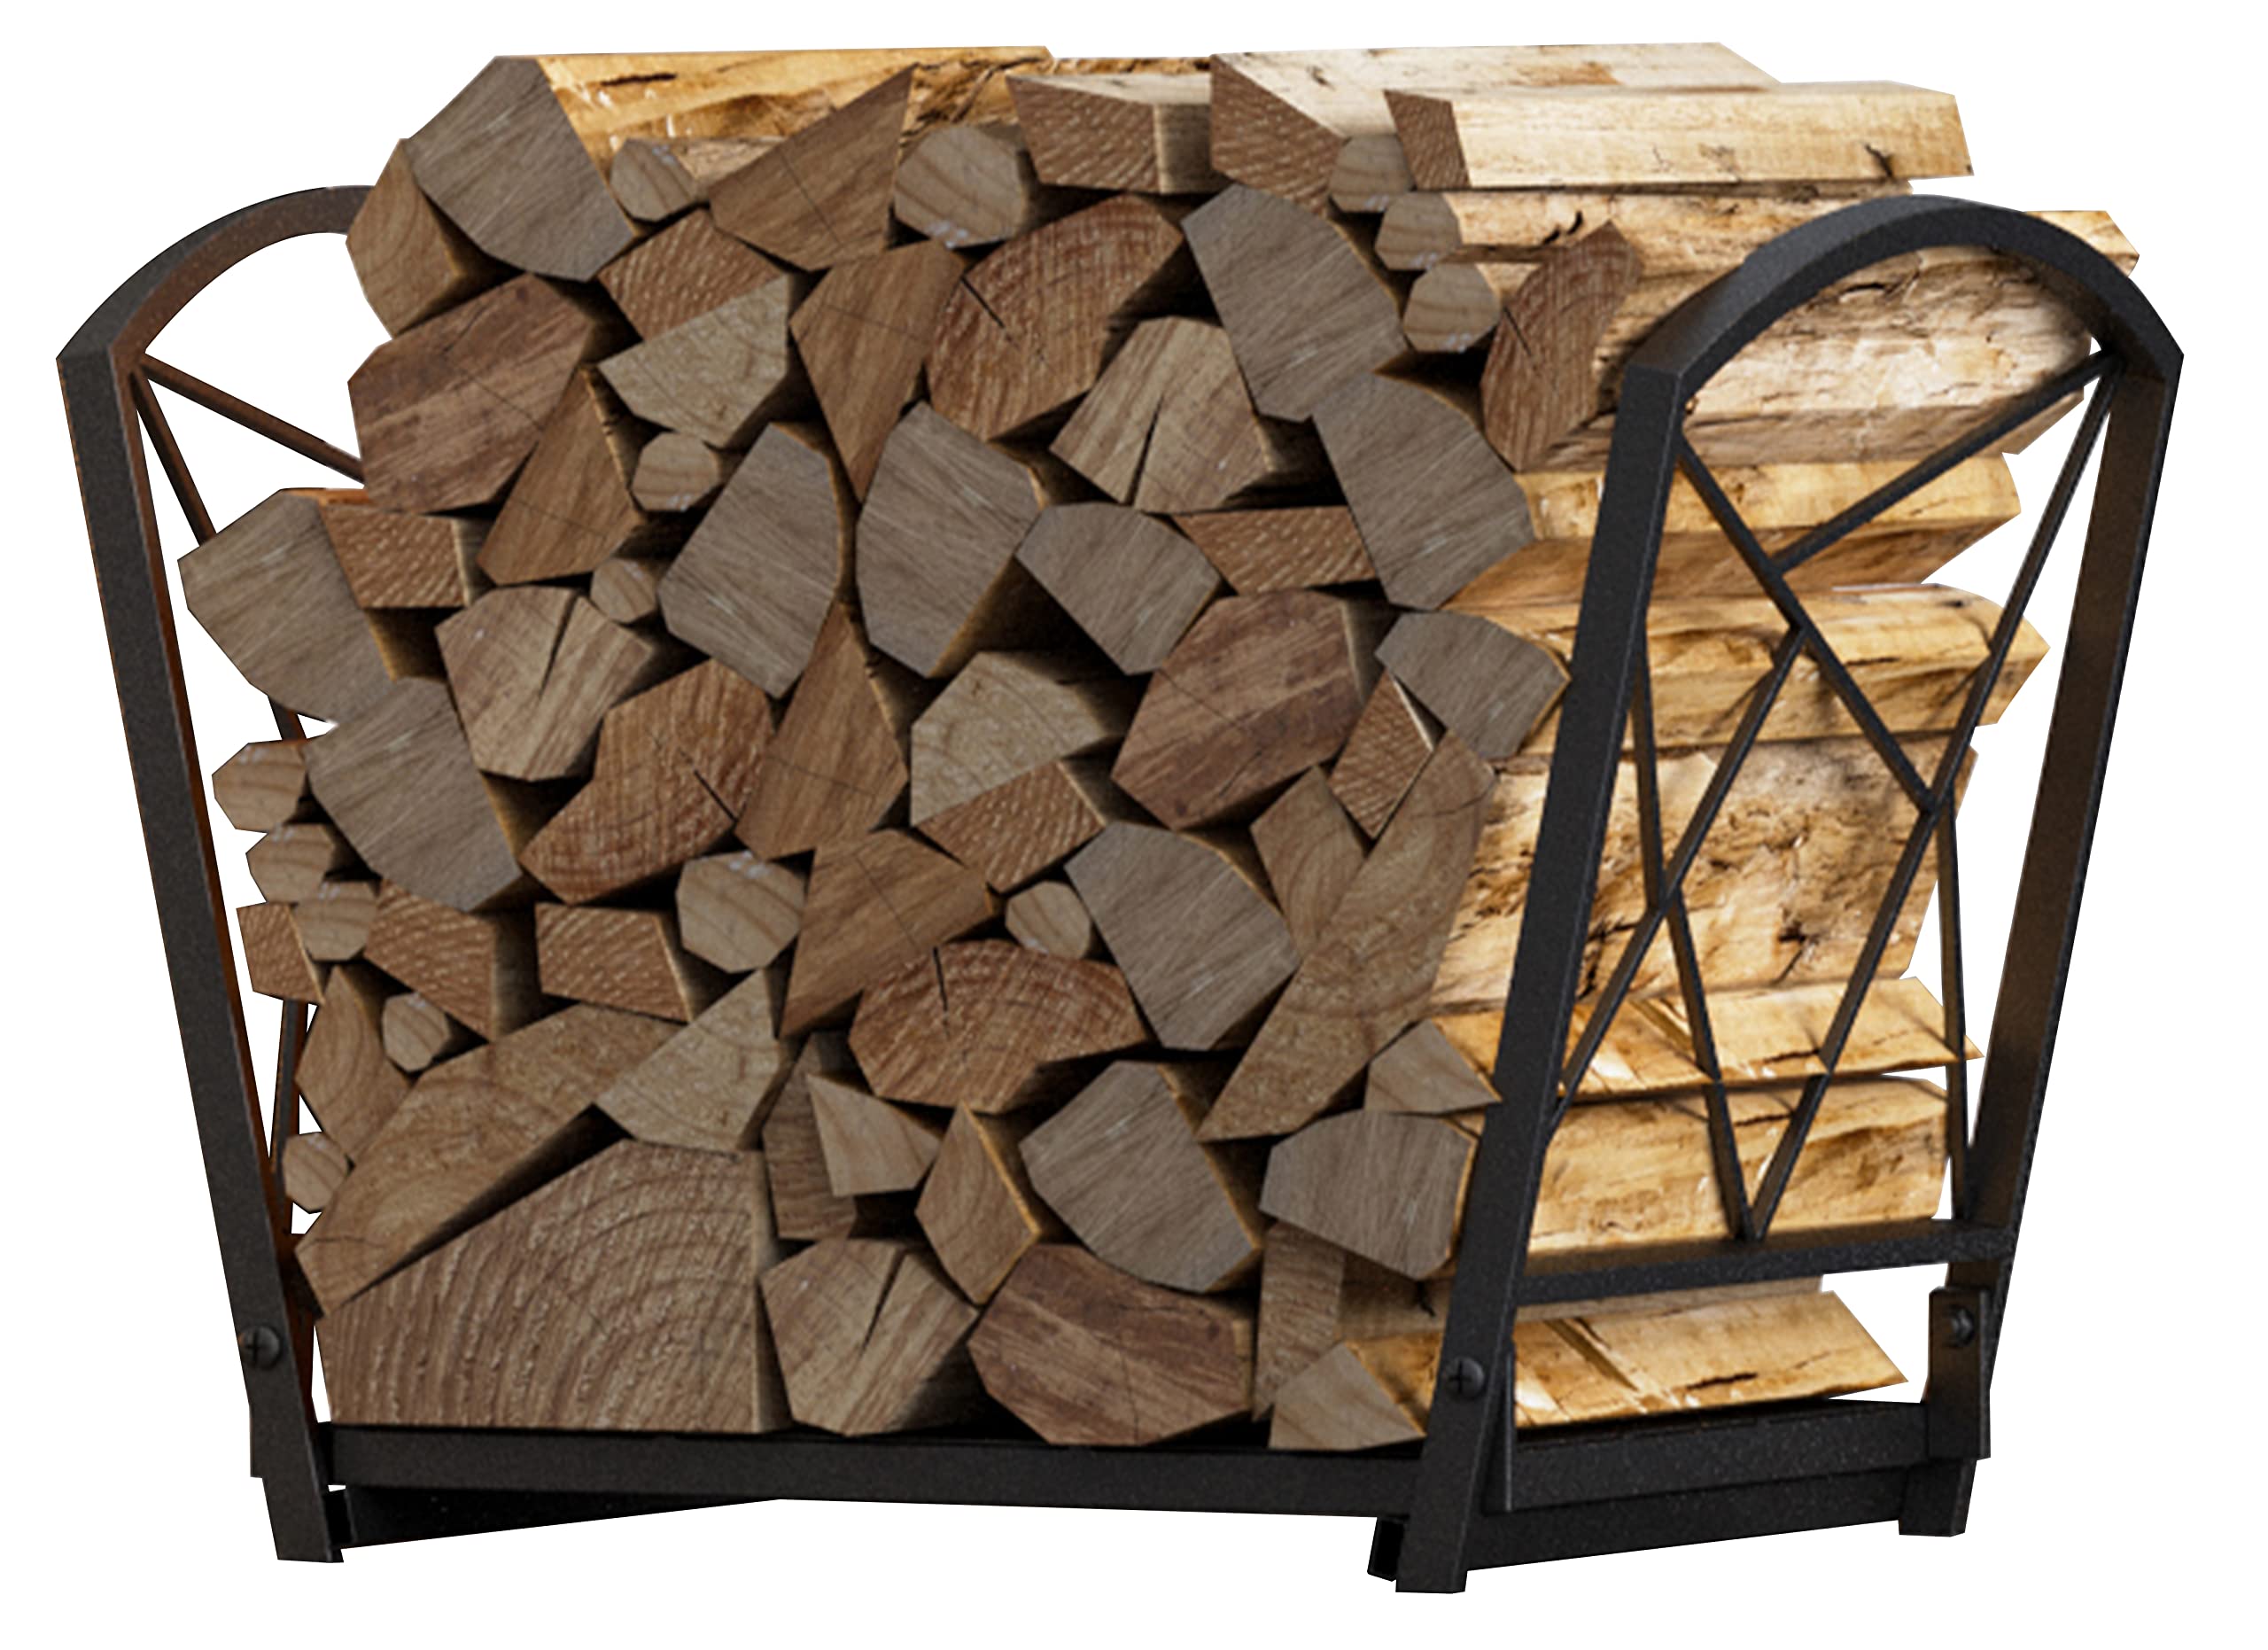 Fire Beauty Firewood Log Rack, Iron Wood Lumber Storage Holder for Fireplace, Heavy Duty Log Storage Bin for Firepit Stove Accessories